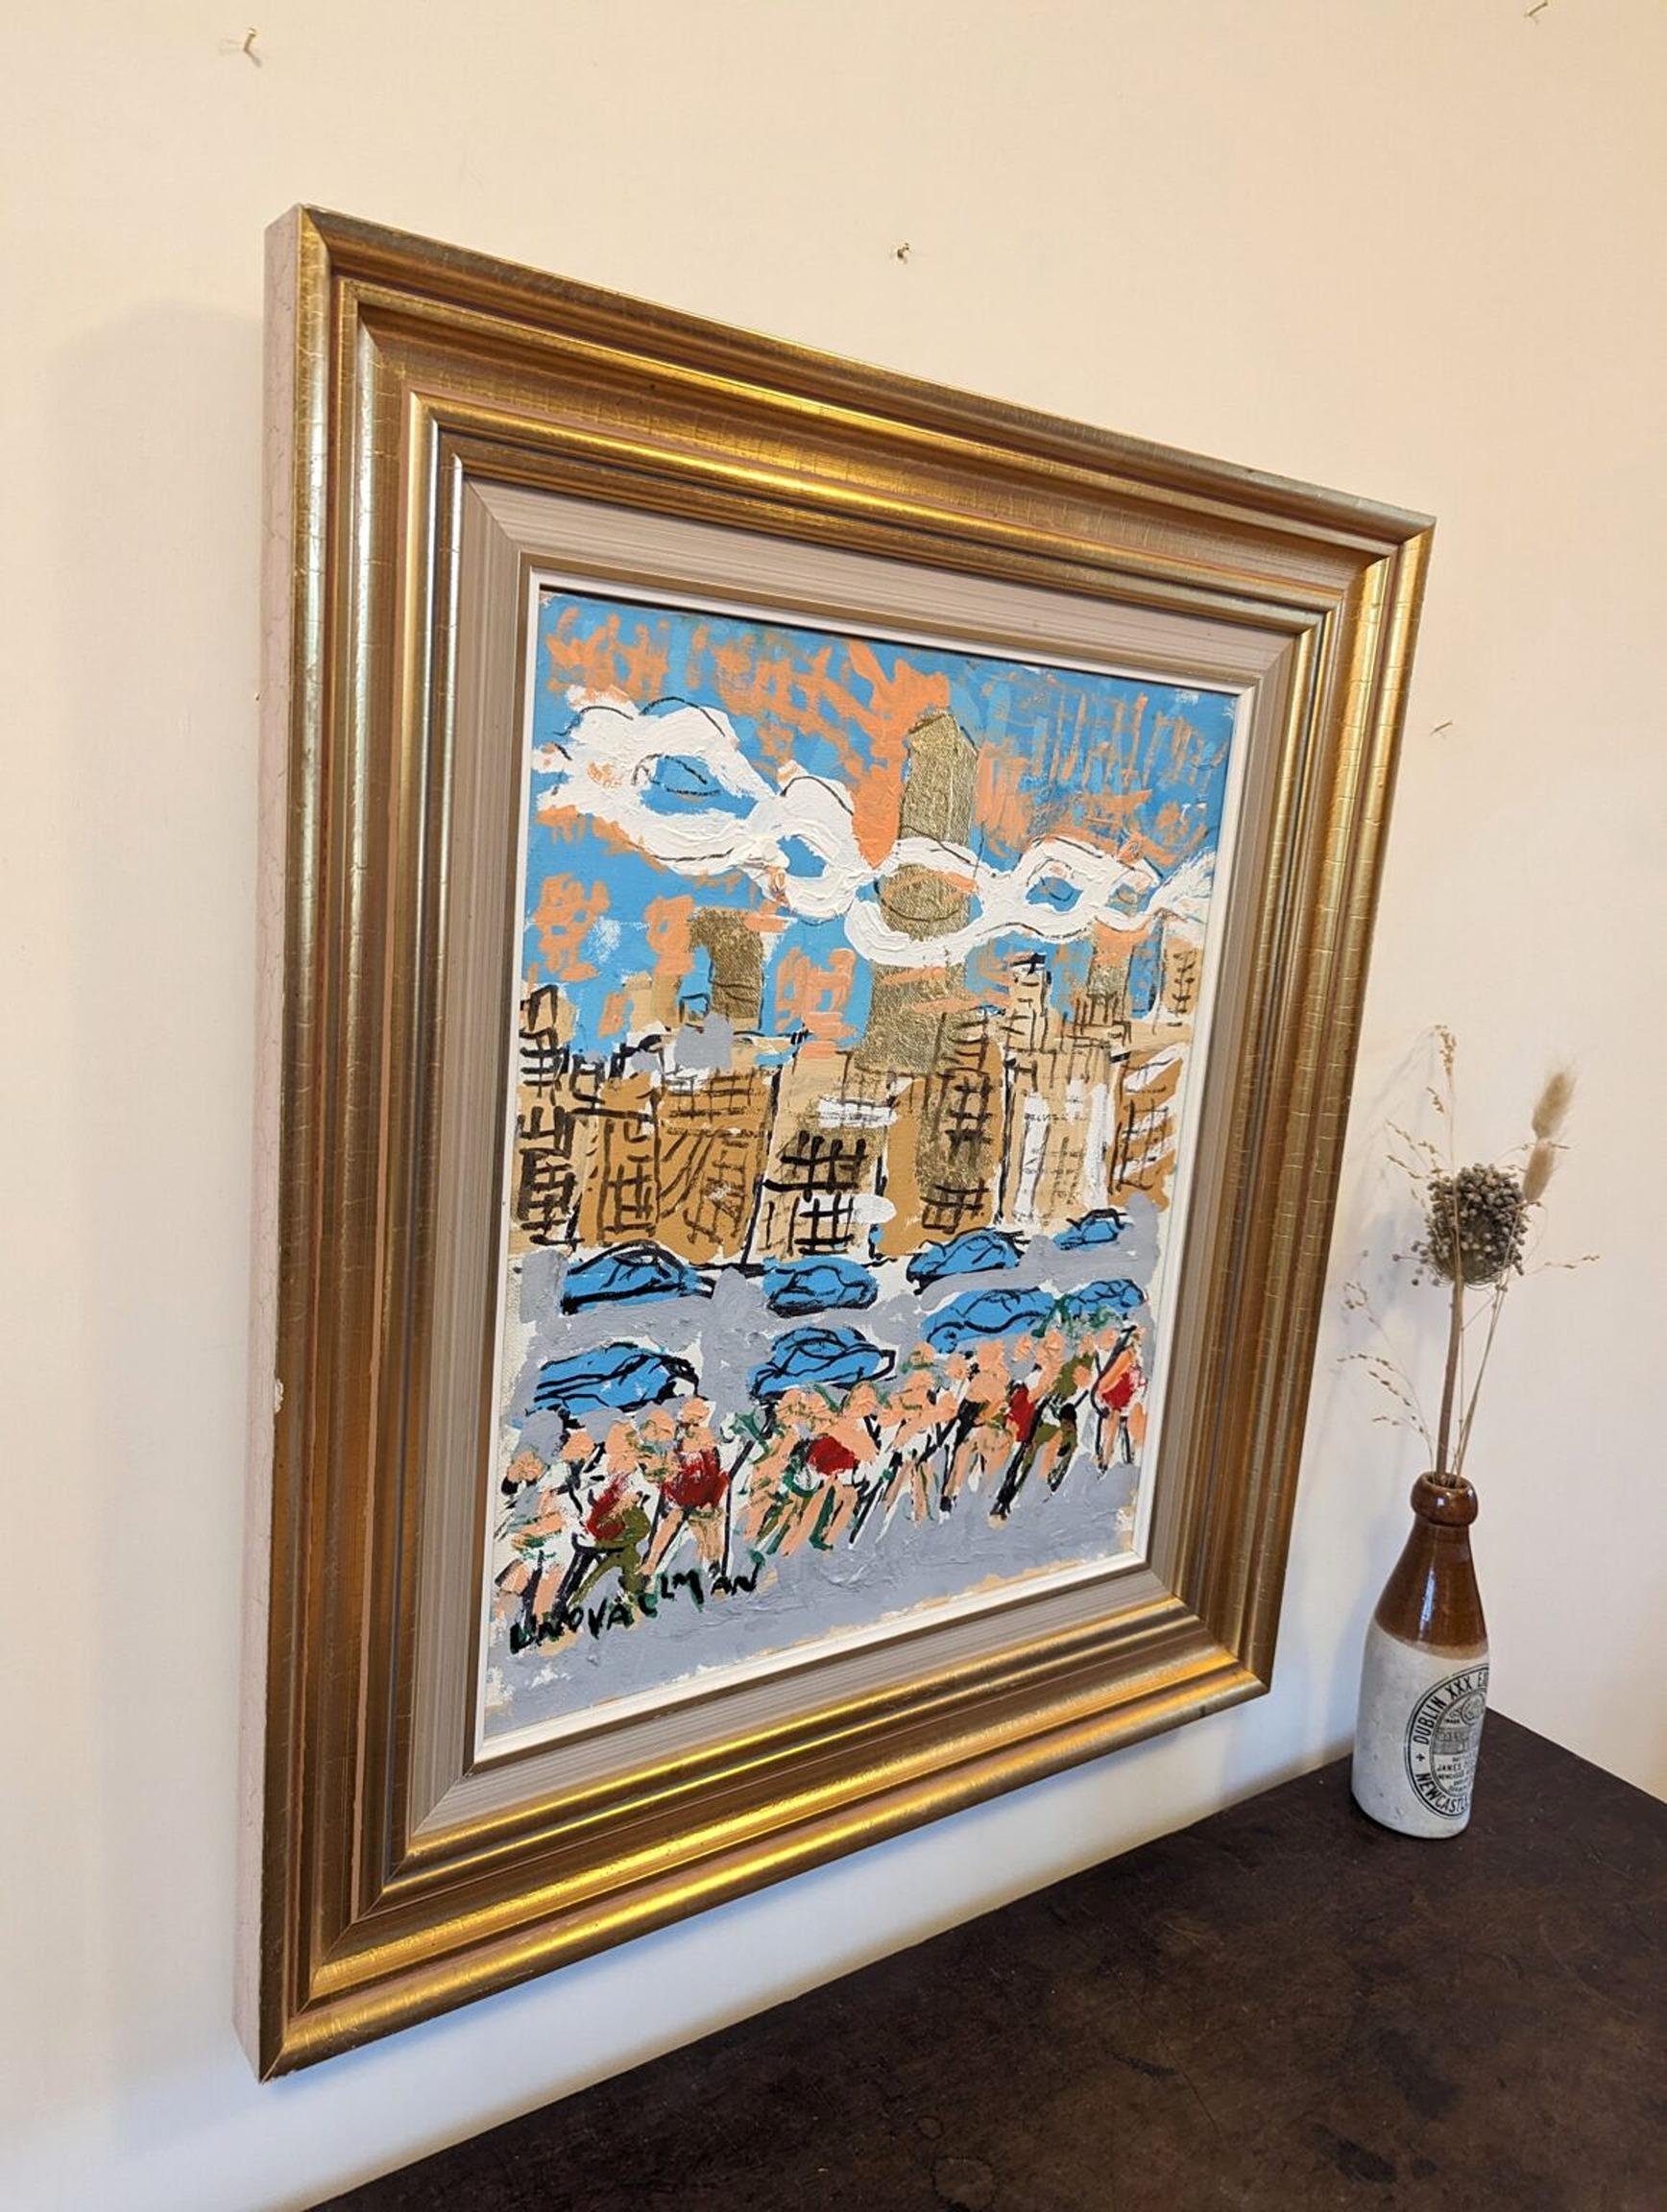 1998 Vintage Swedish Framed Cityscape Oil Painting by Uno Vallman - City Tour For Sale 4